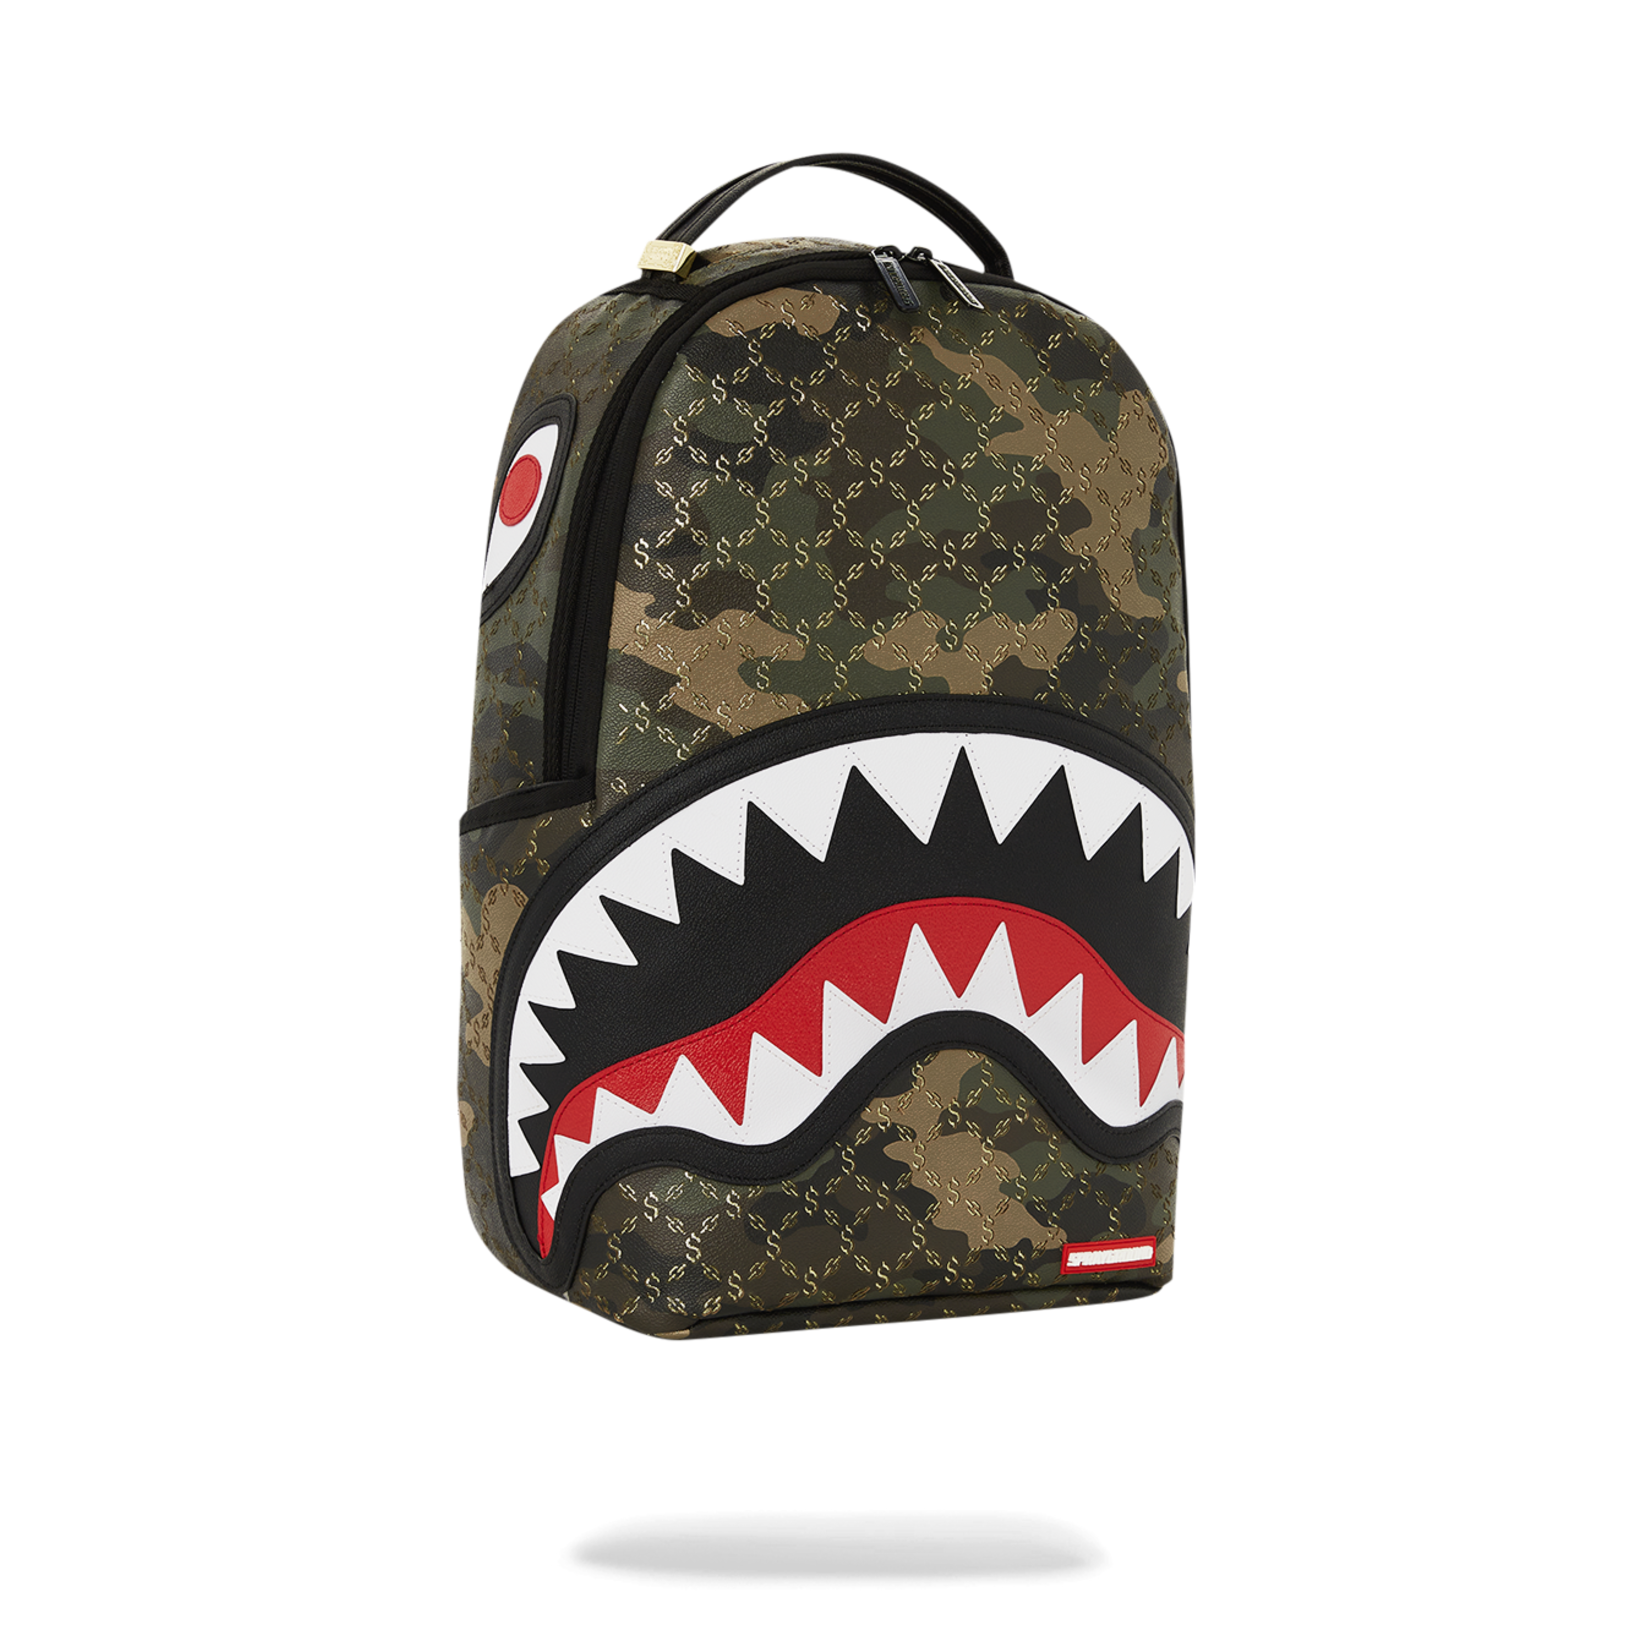 Sprayground Backpack Detailed Review 